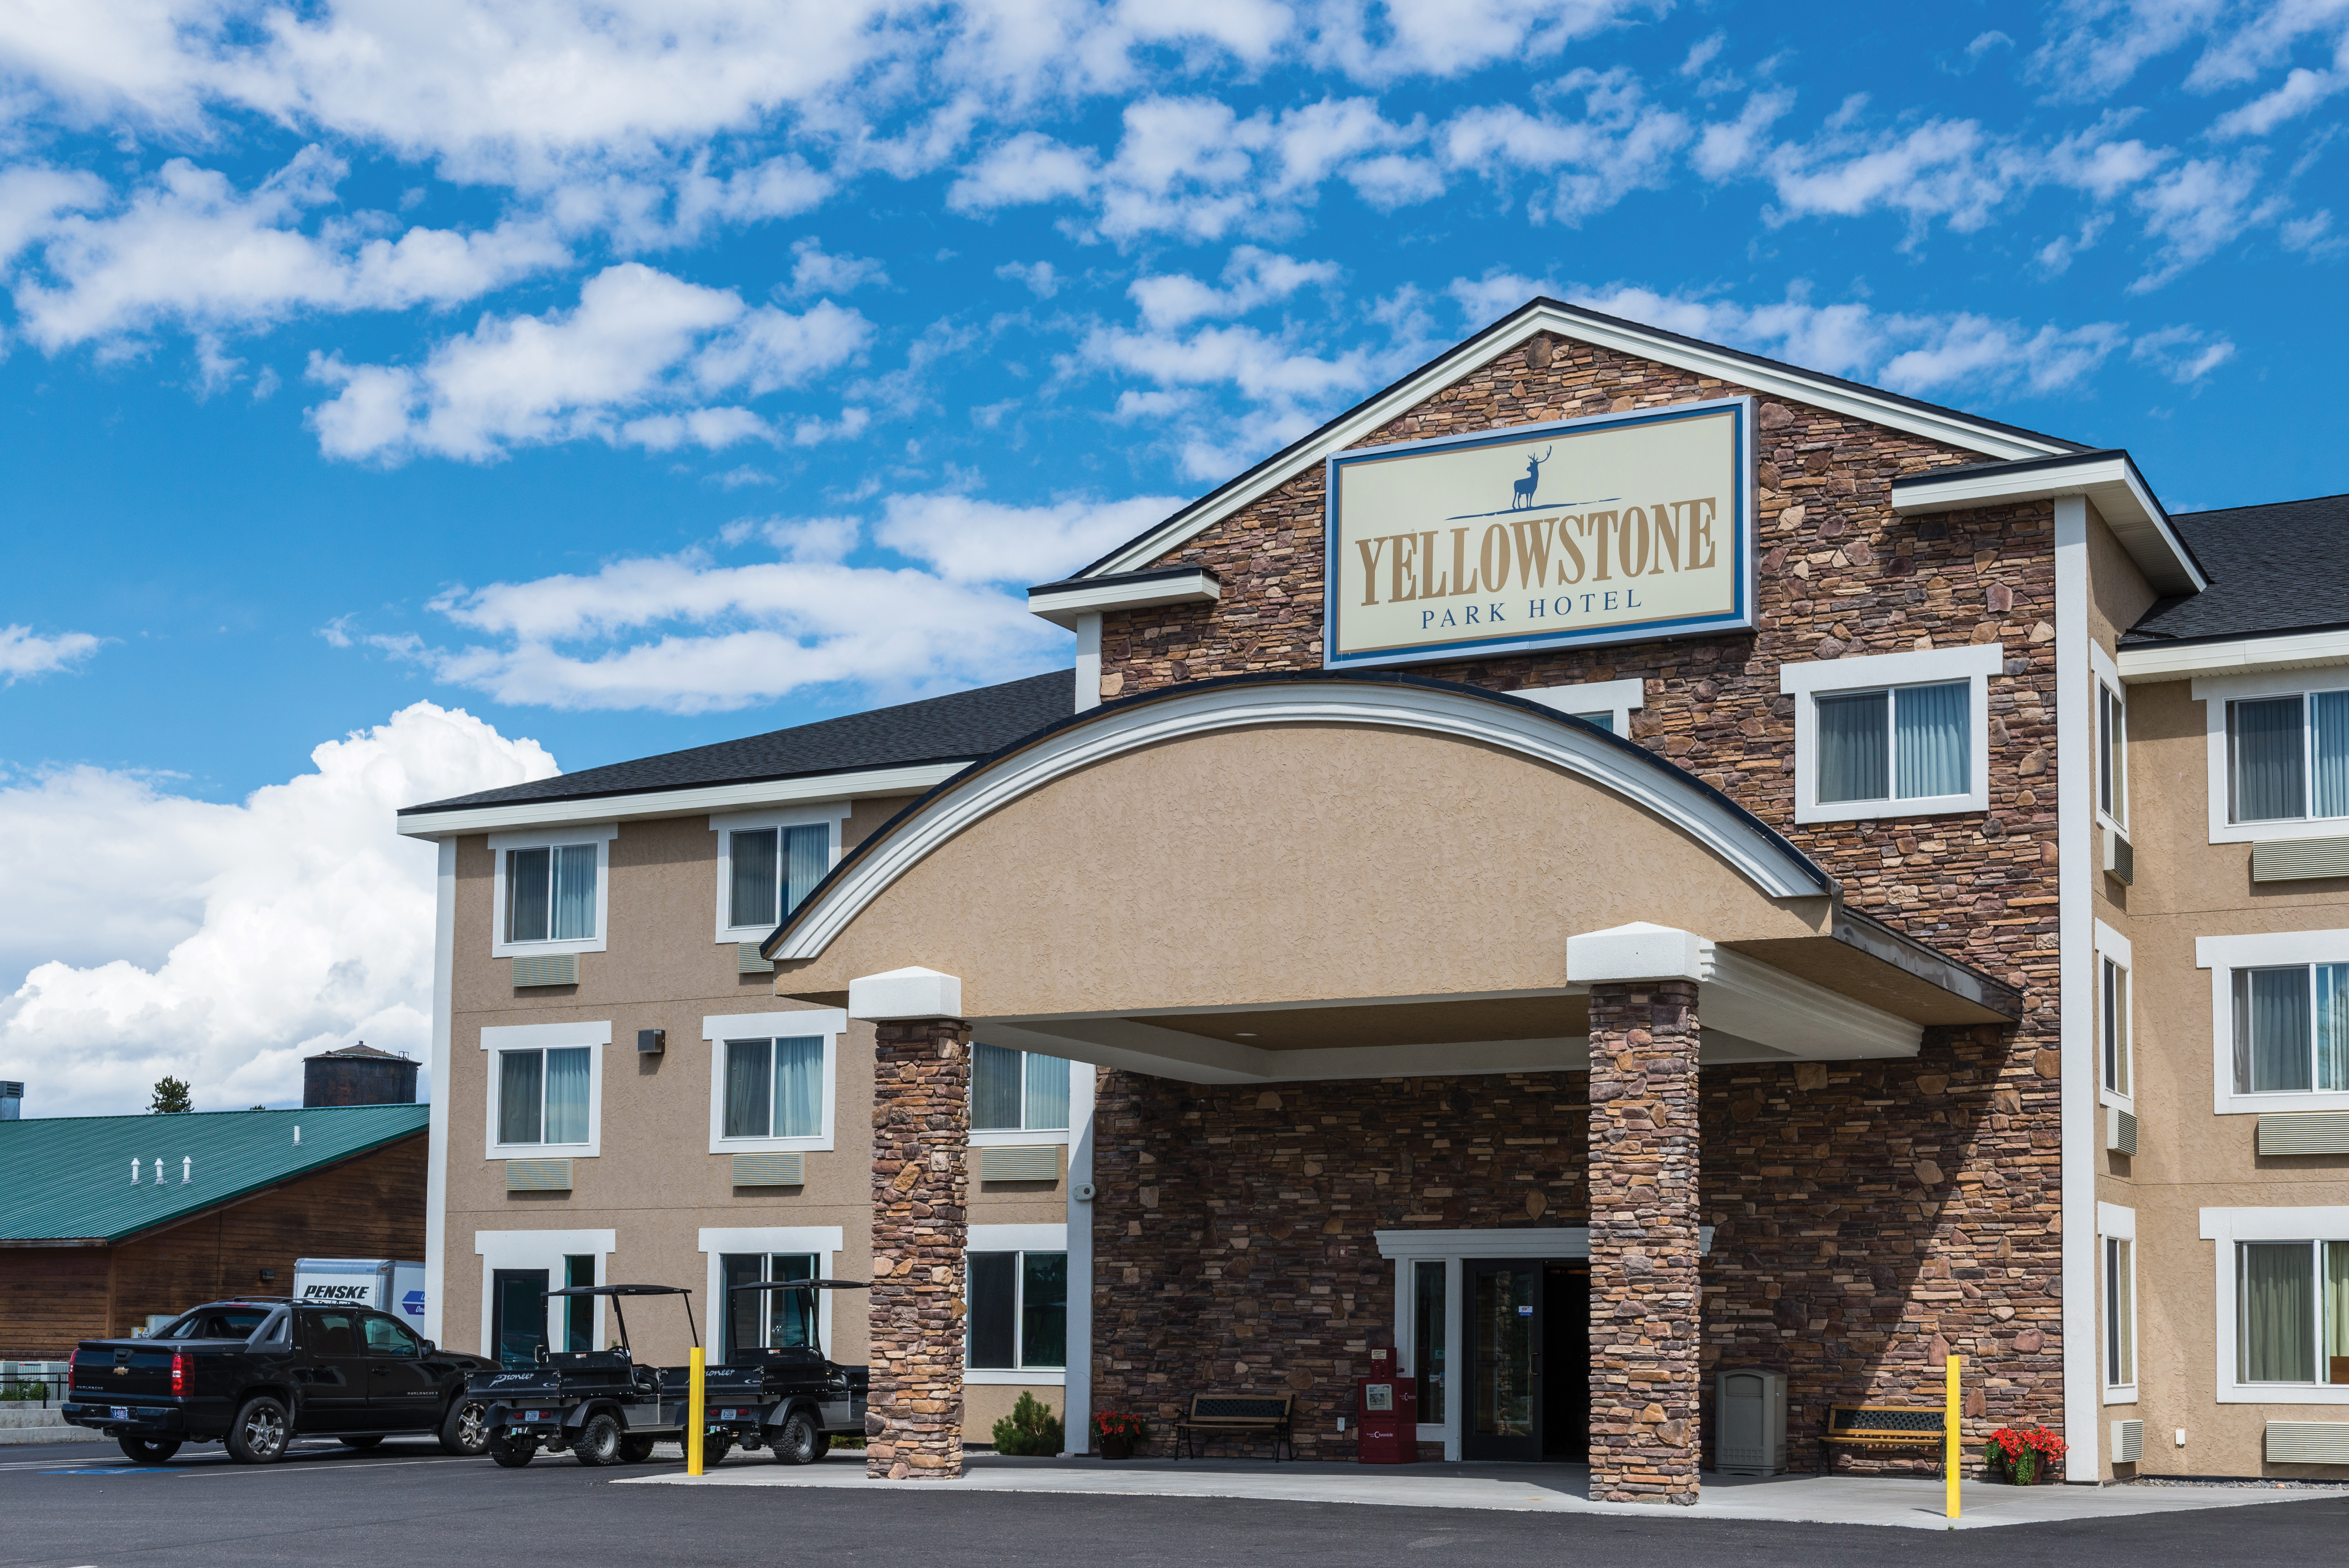 The main entrance of Yellowstone Park Hotel.